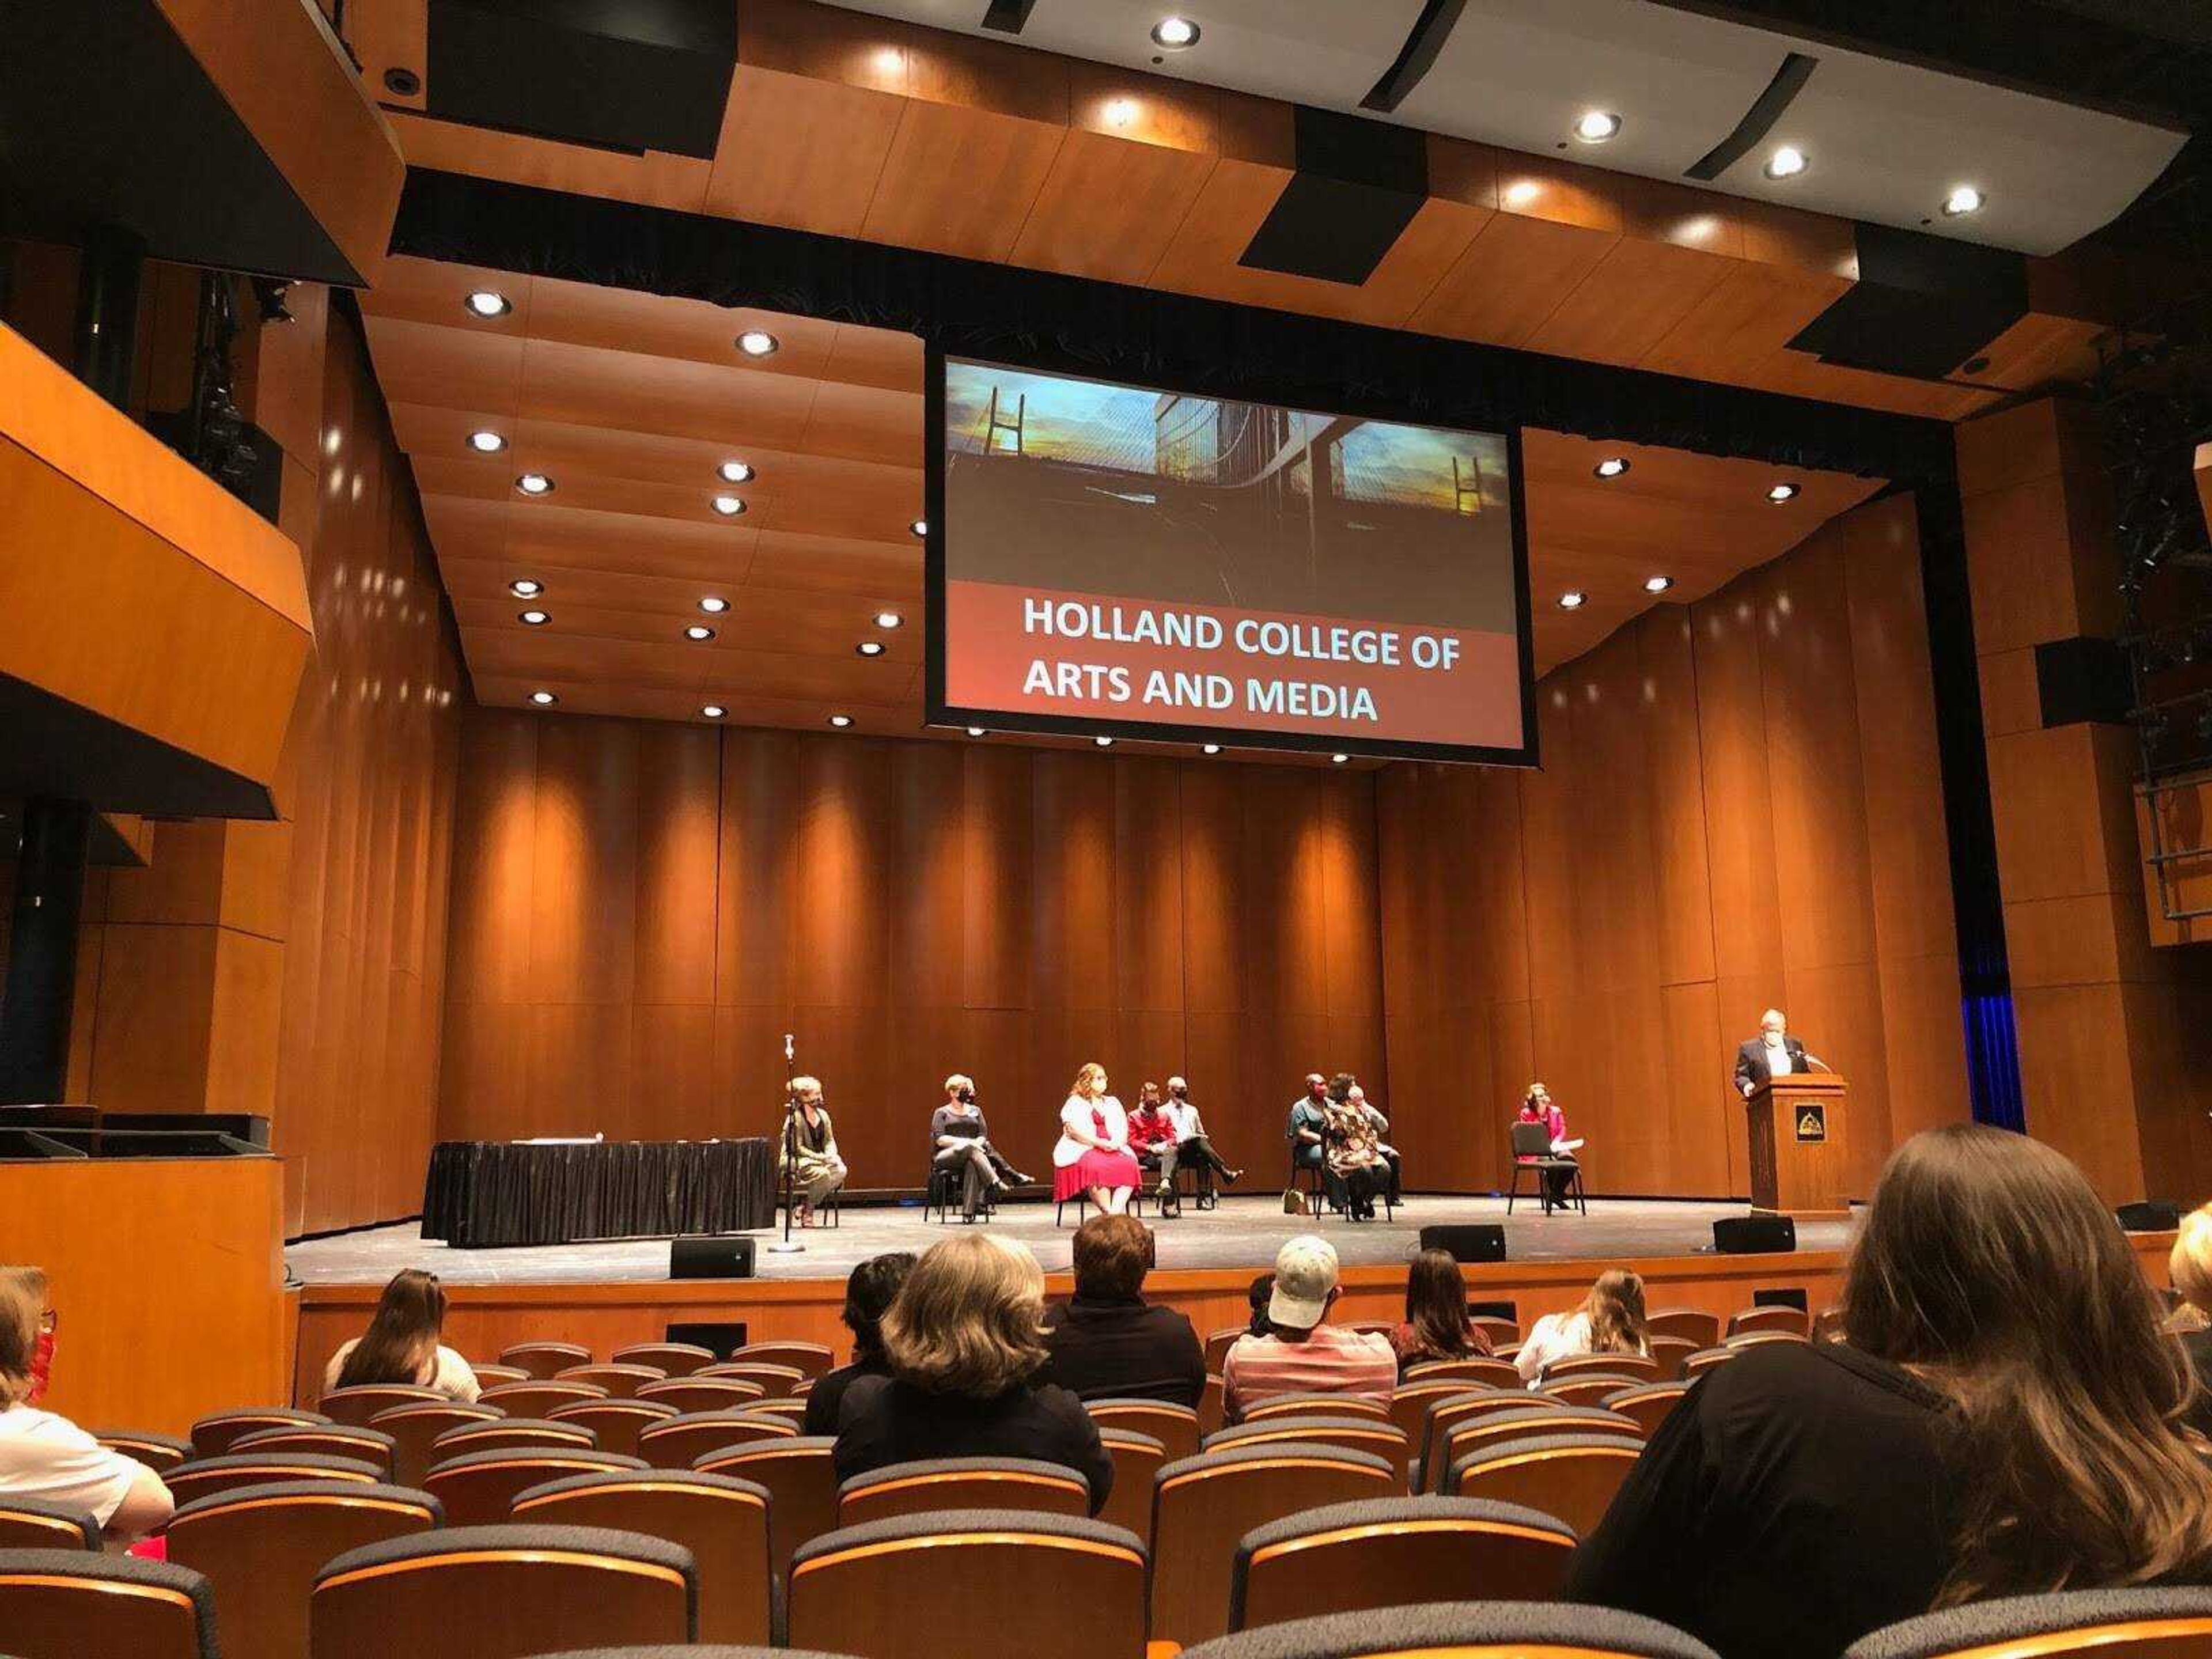 The Holland College of Arts and Media hosted an award ceremony for their participating members on April 22, 2021. Faculty, students, and staff members received awards for their commitment and dedication to the work in the college.